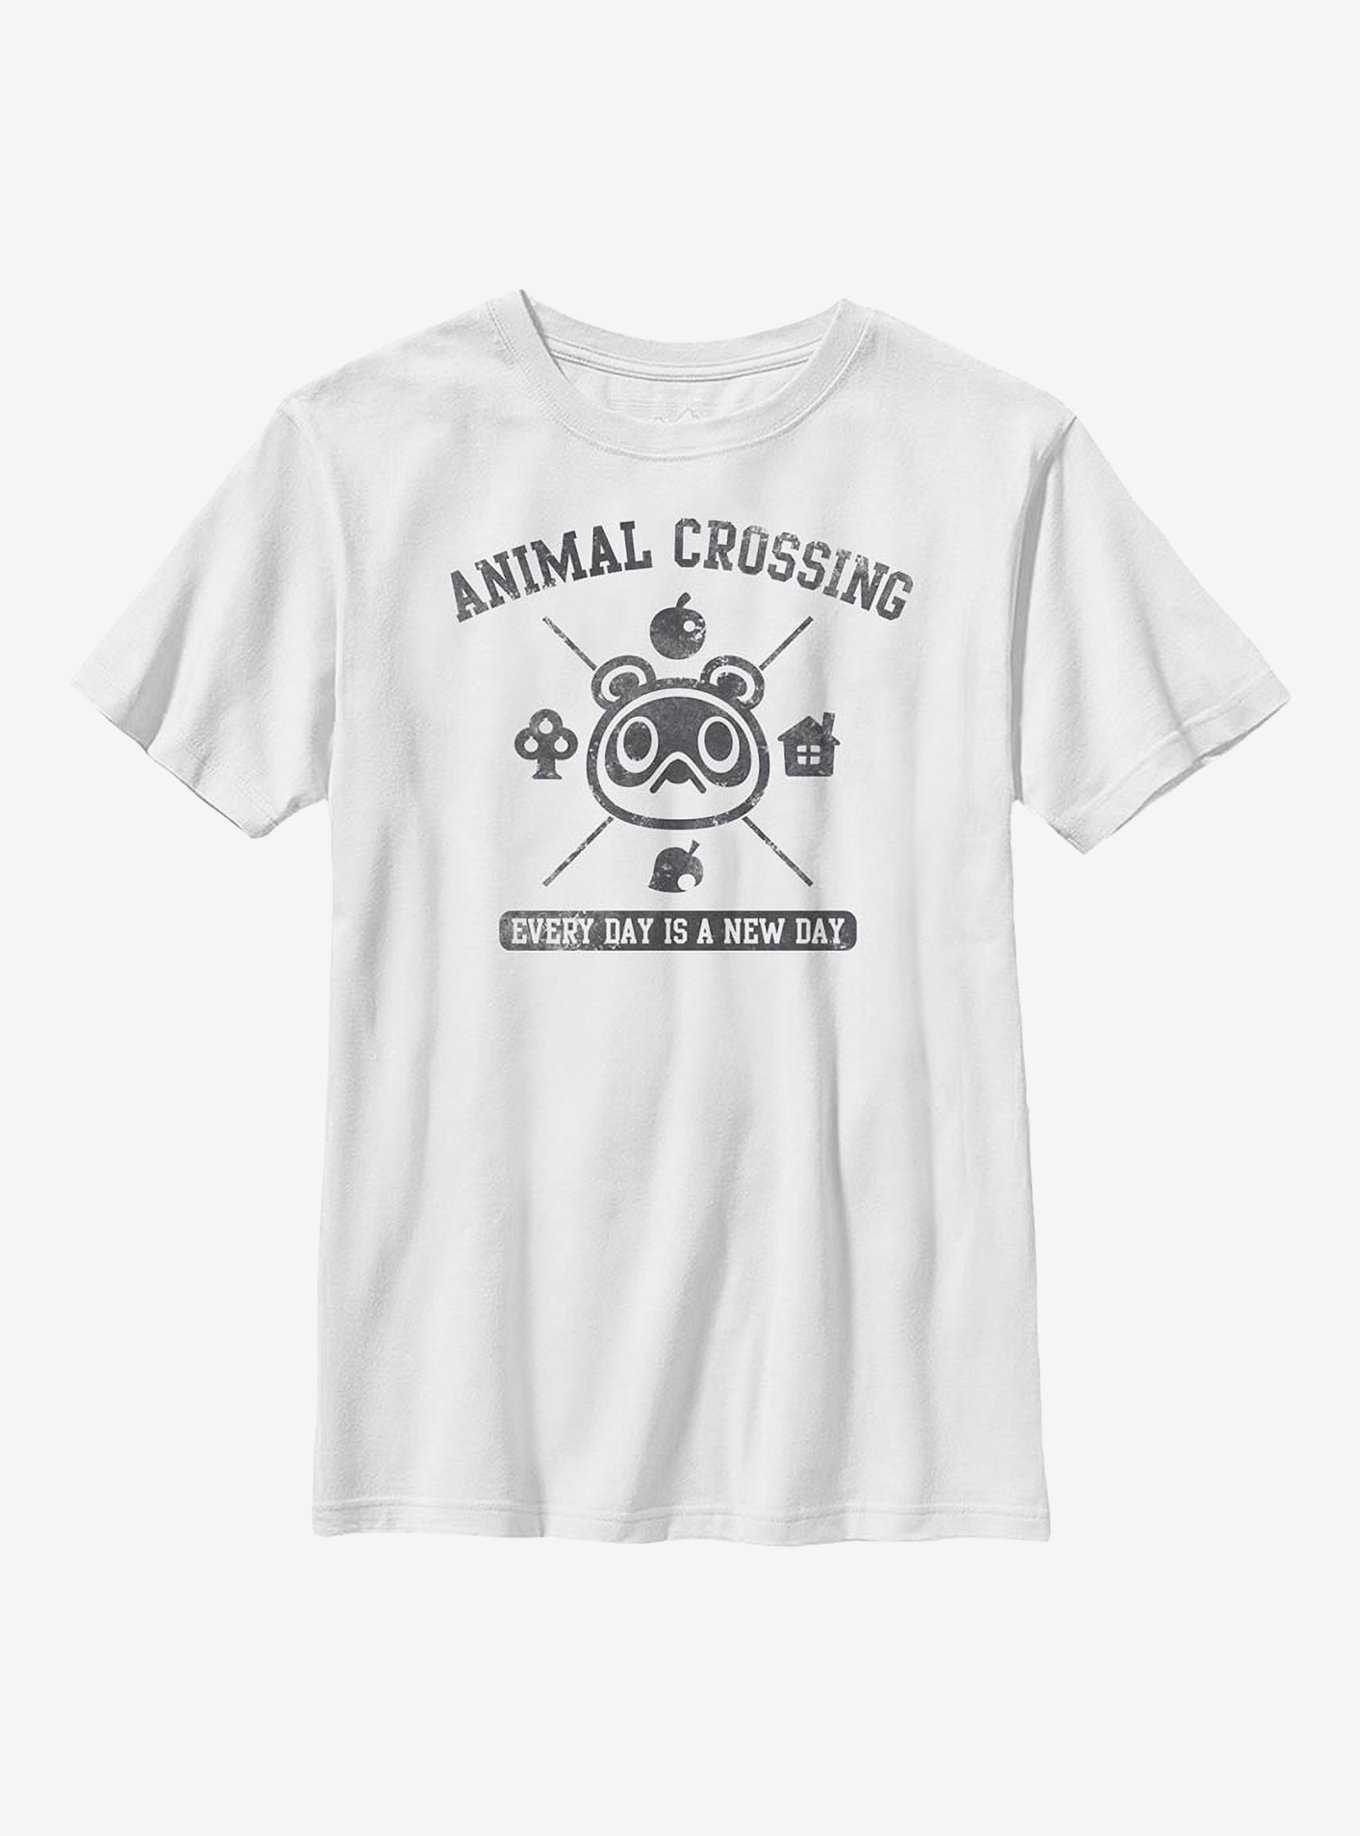 Animal Crossing Nook Every Day Youth T-Shirt, , hi-res